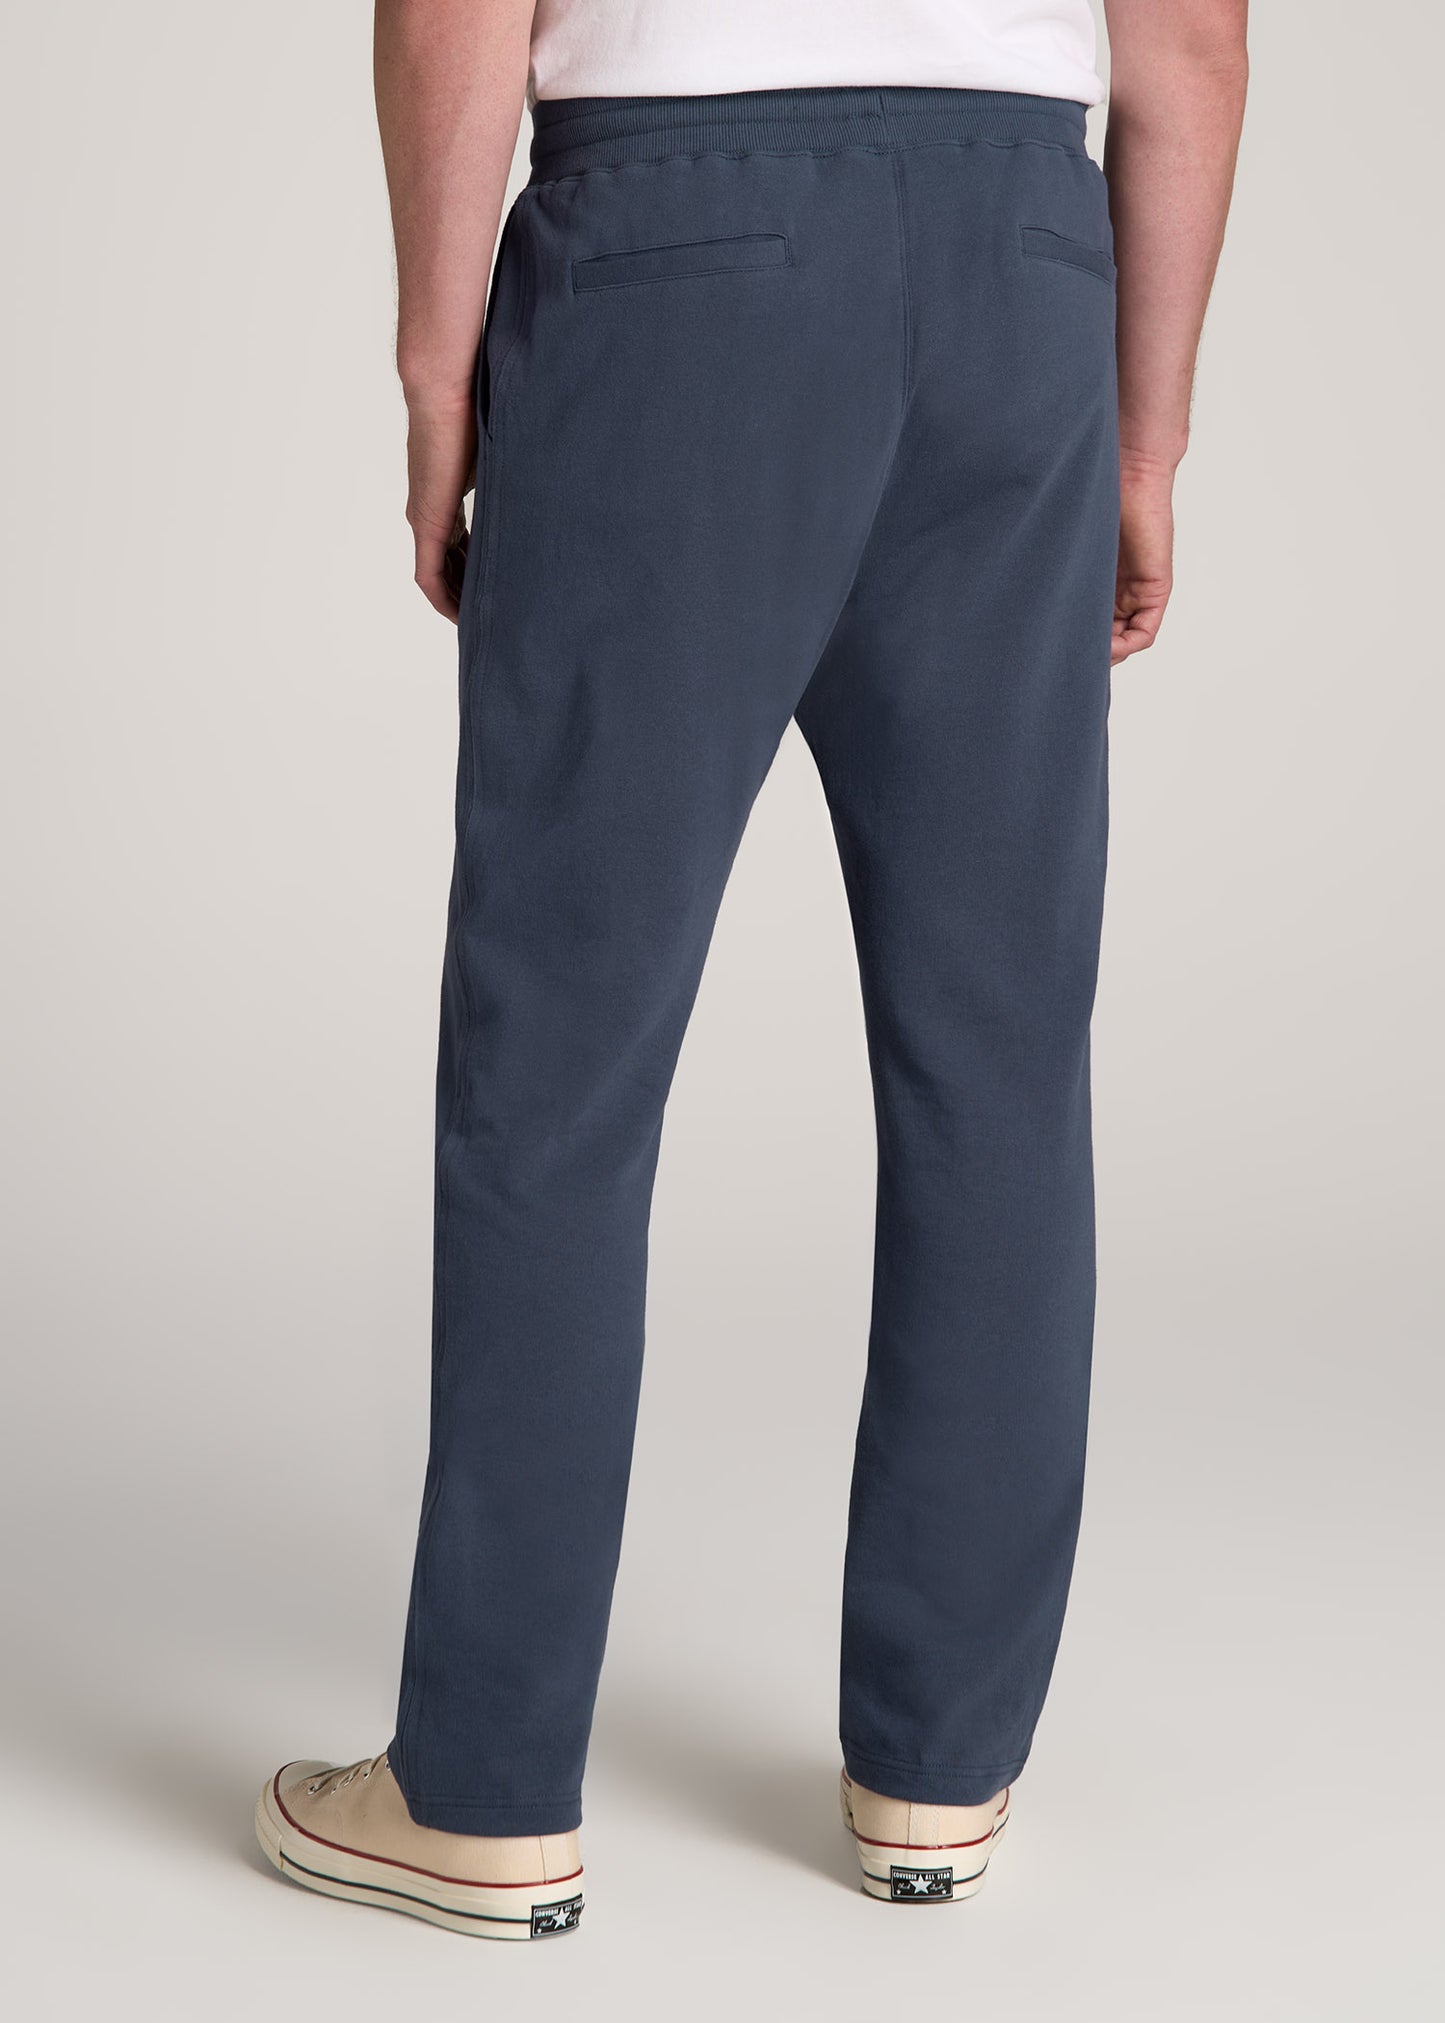 LJ Brushed Terrycloth Pants for Tall Men